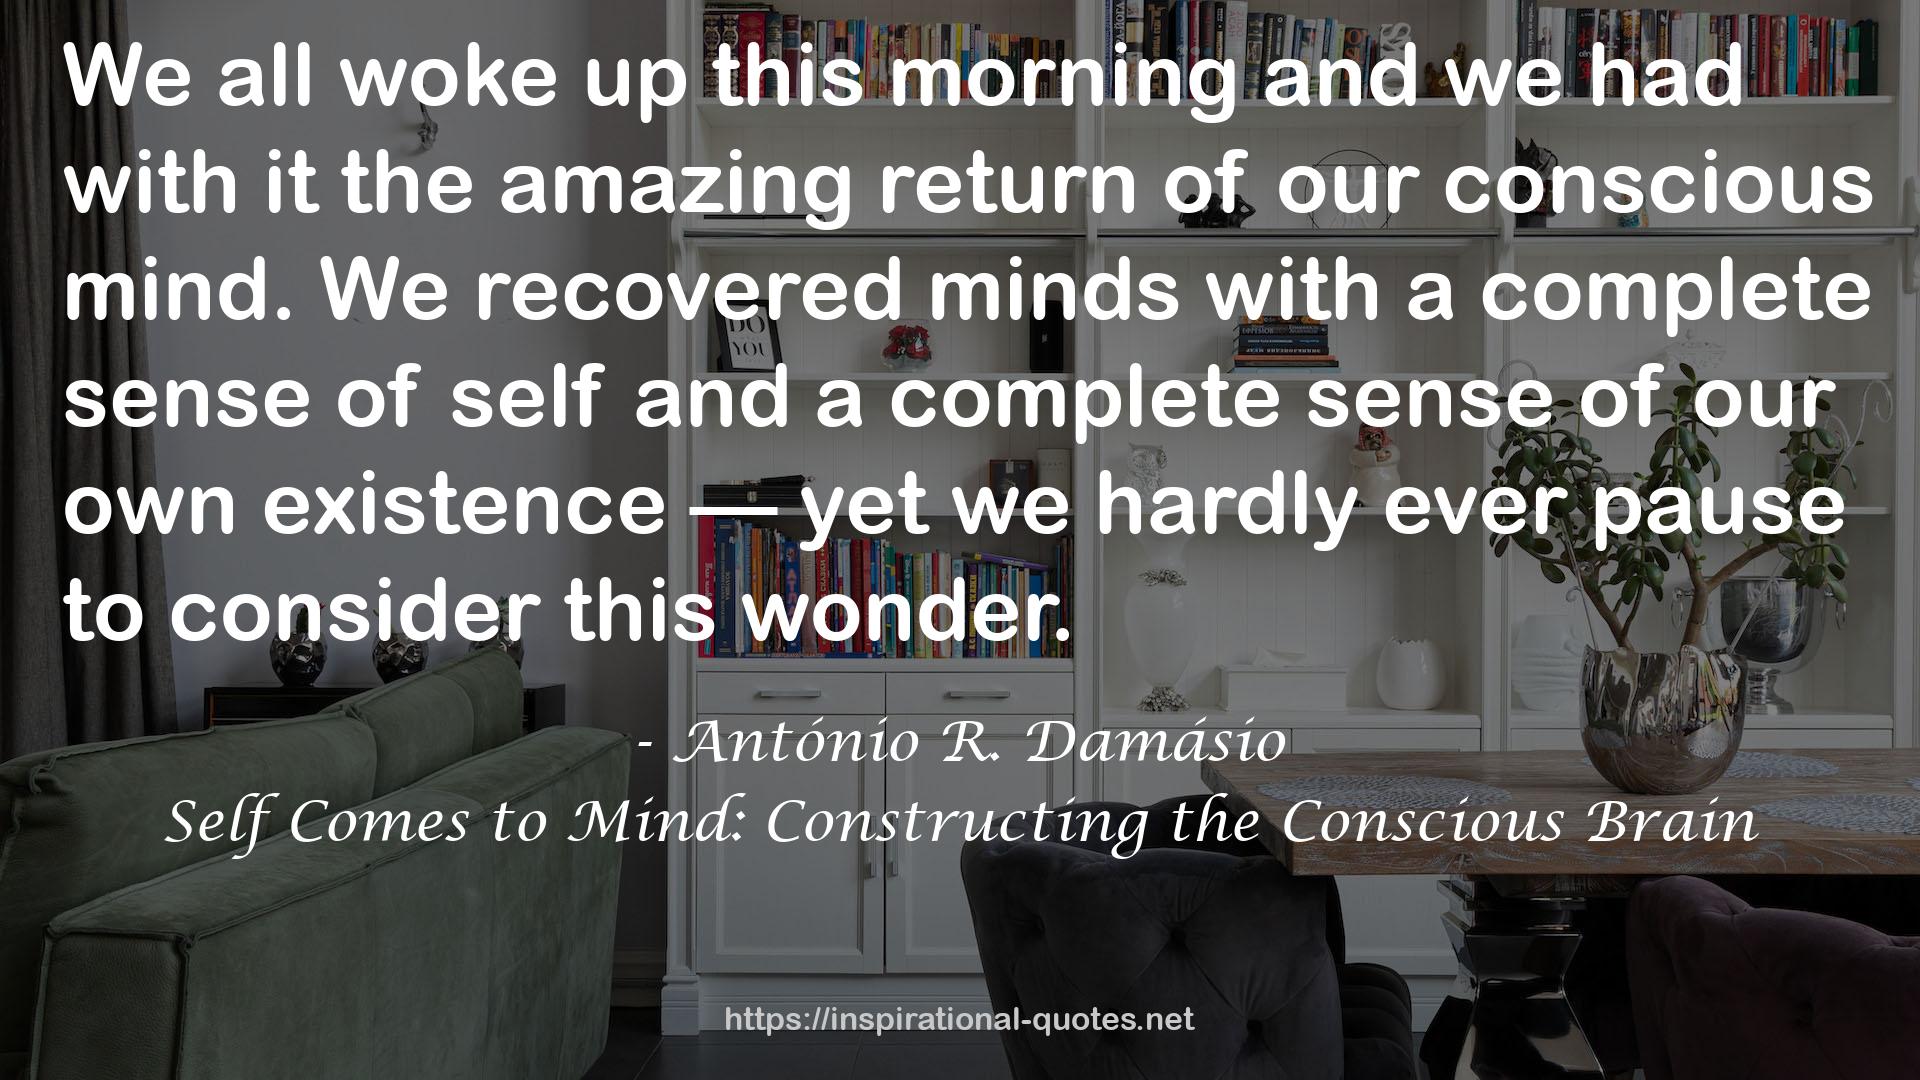 Self Comes to Mind: Constructing the Conscious Brain QUOTES